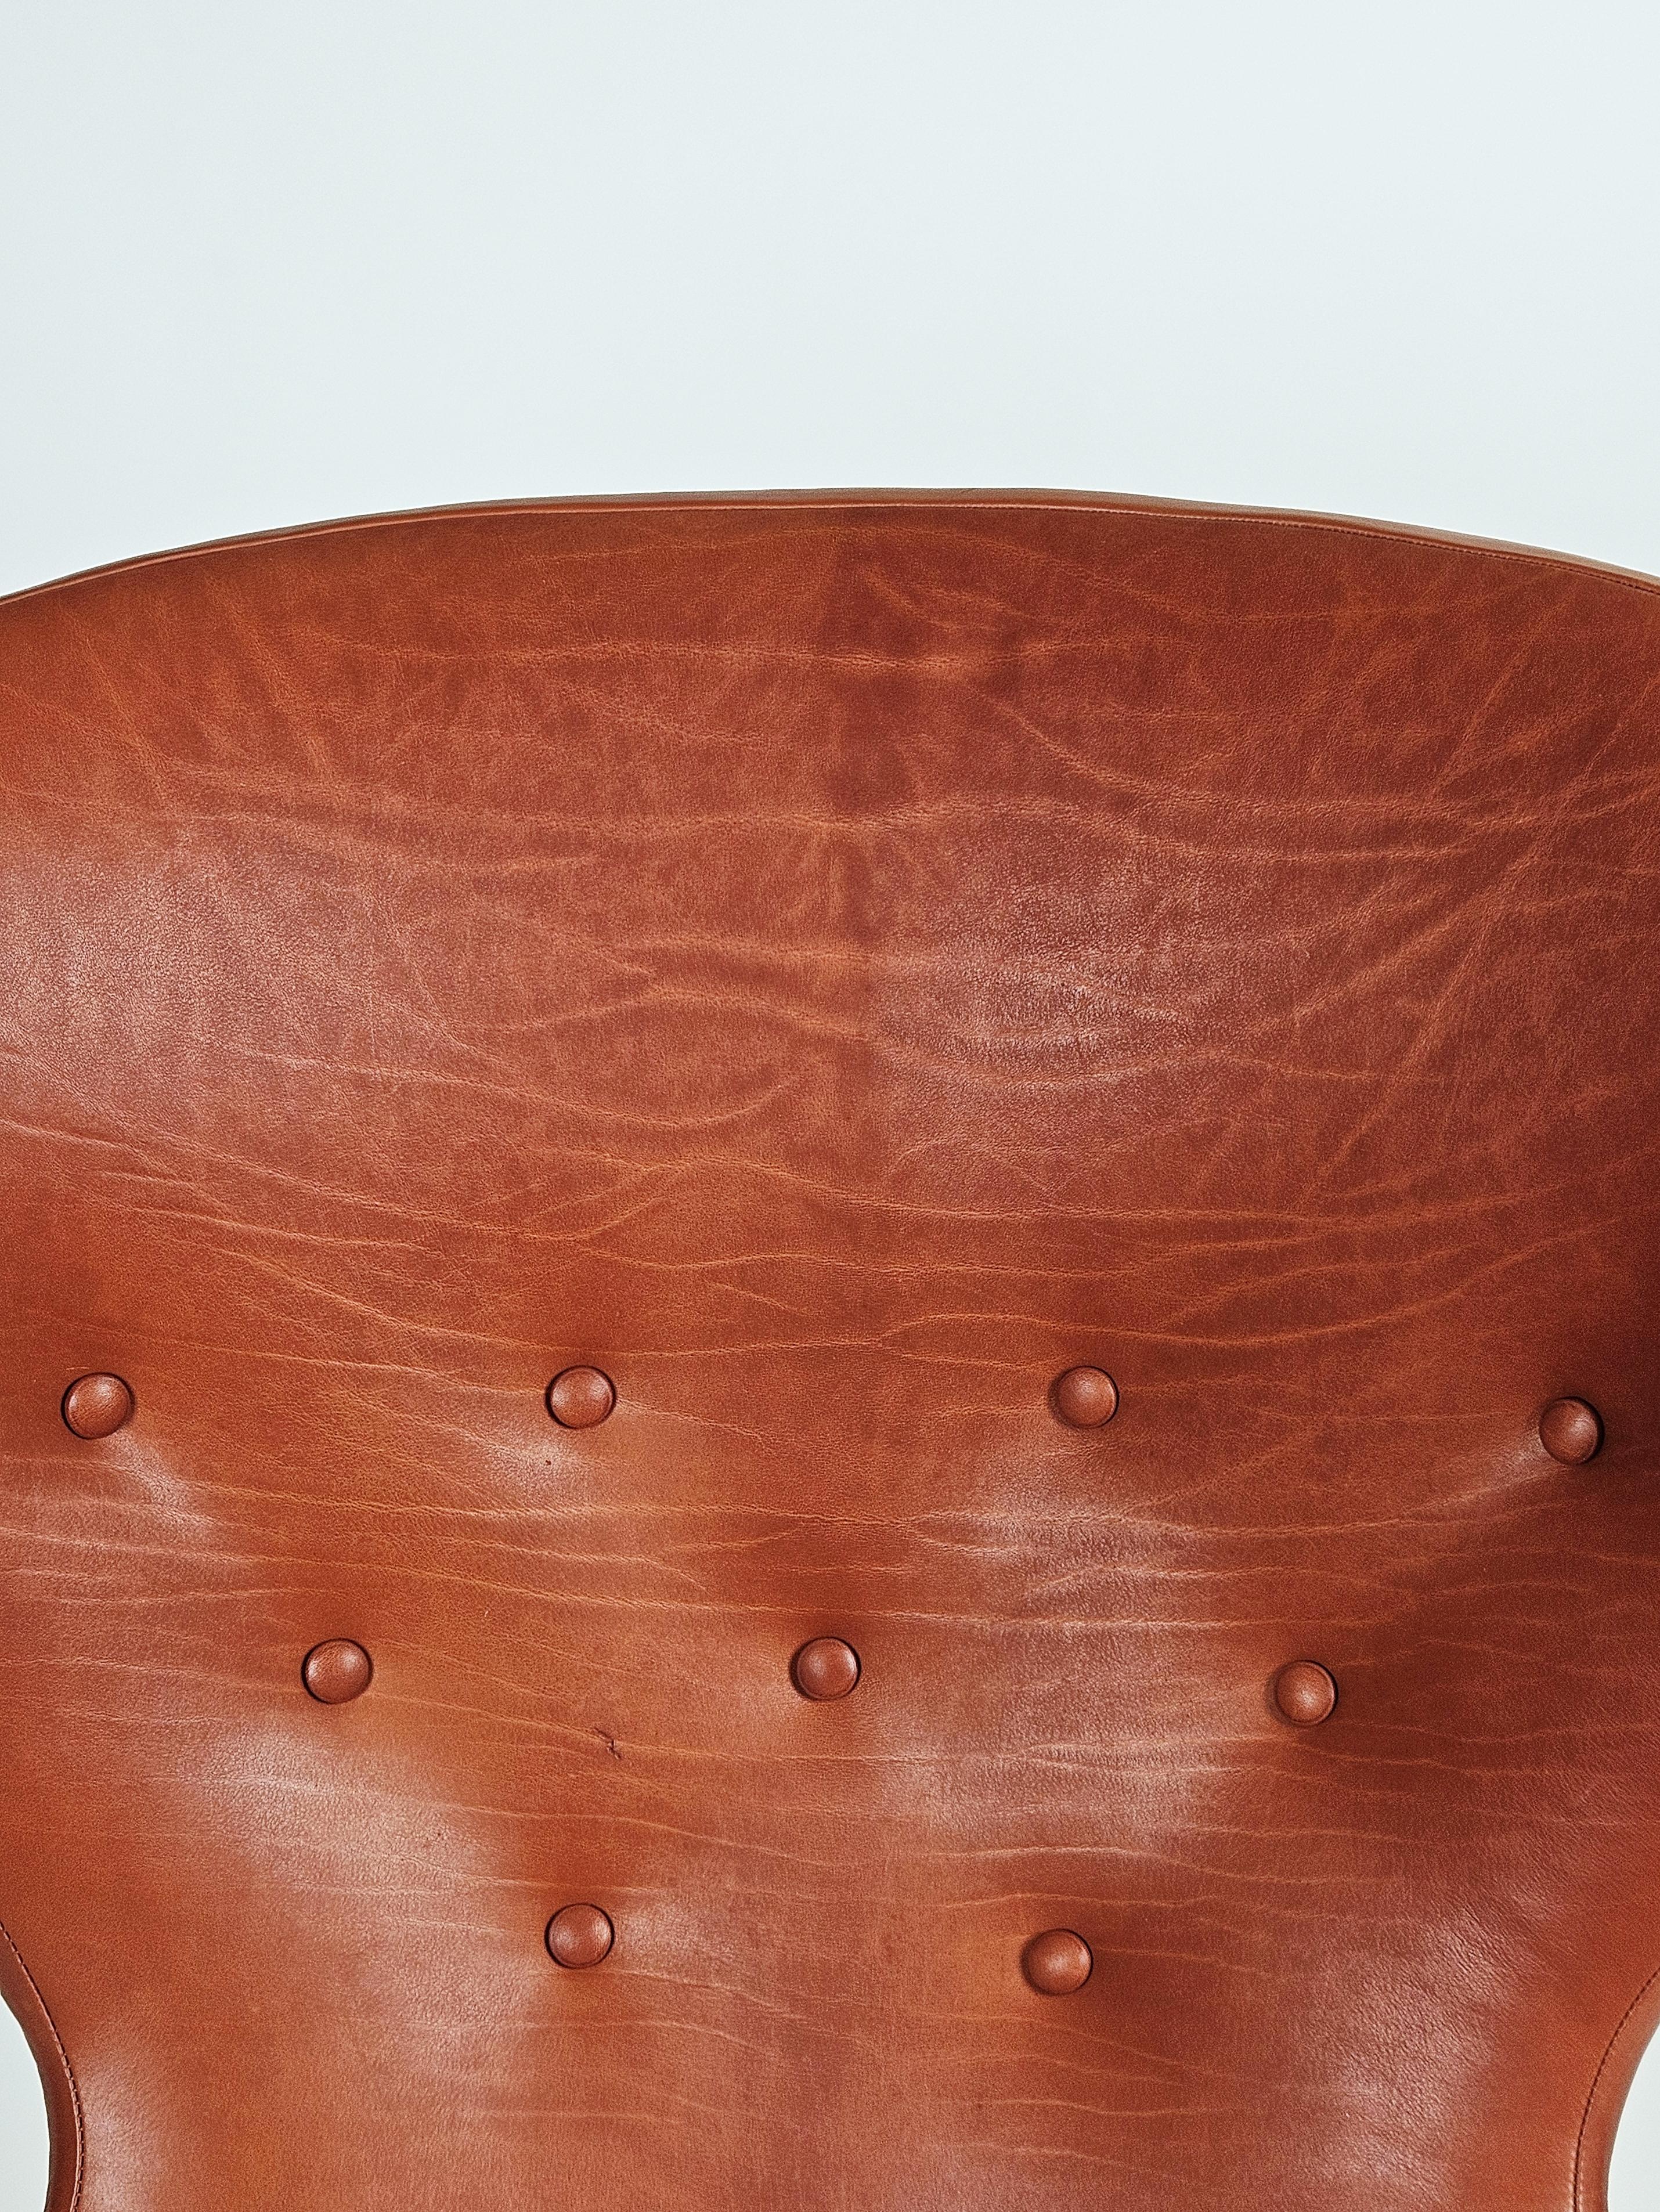 Leather Rare Scandinavian lounge chair 'Siesta' by Gustaf Hiort af Ornäs, Finland, 1950s For Sale